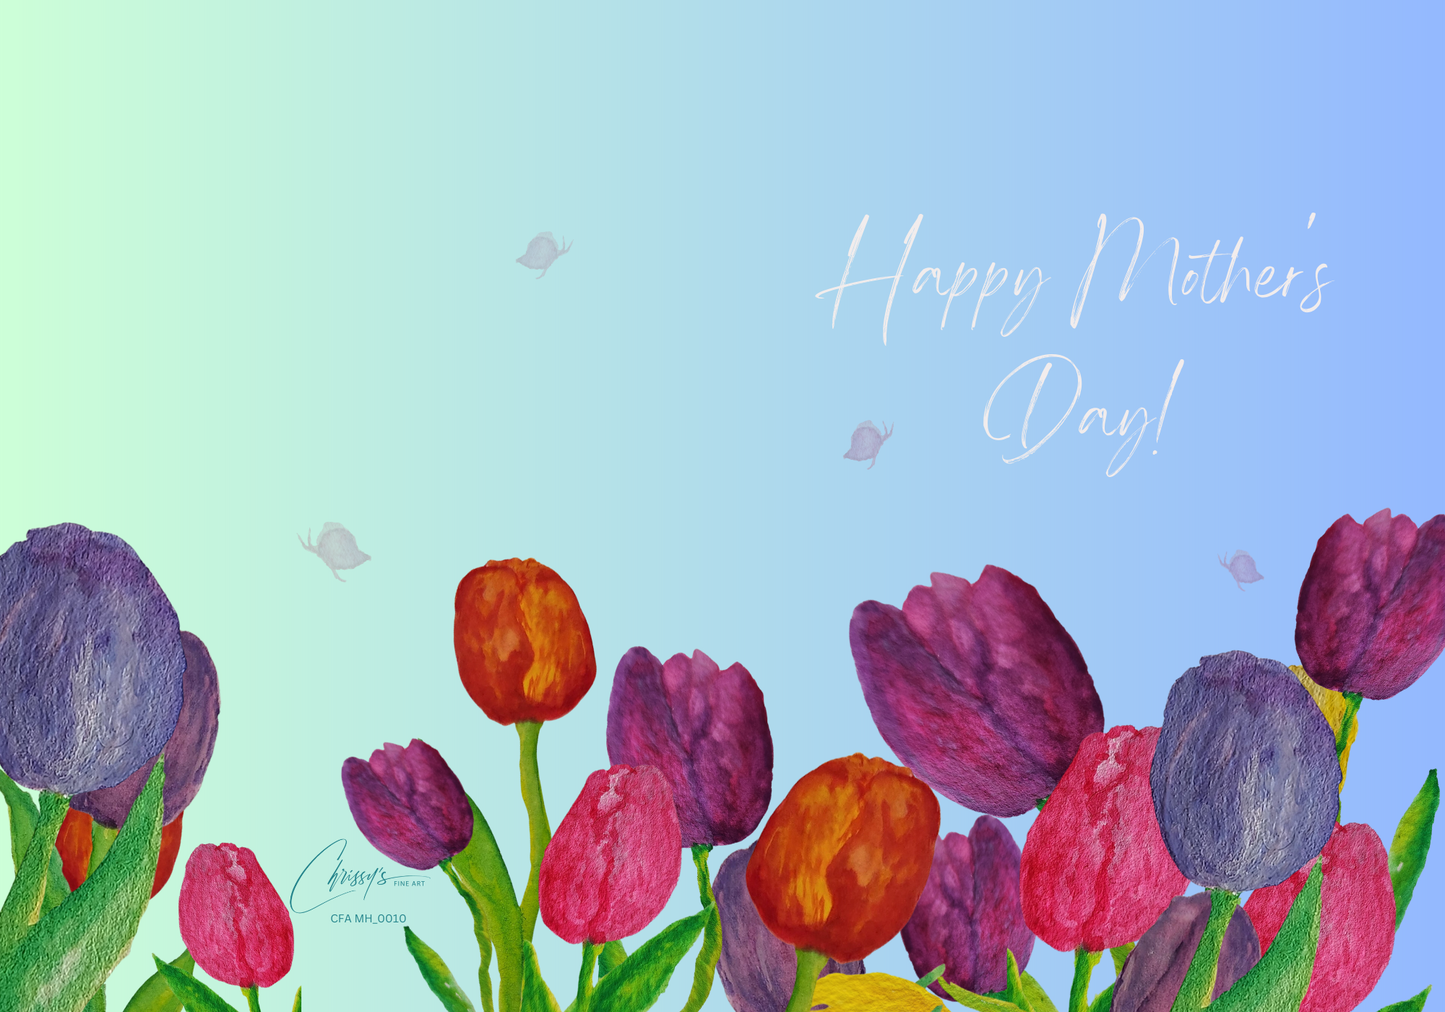 Field of Tulips! Mother's Day Greeting Card